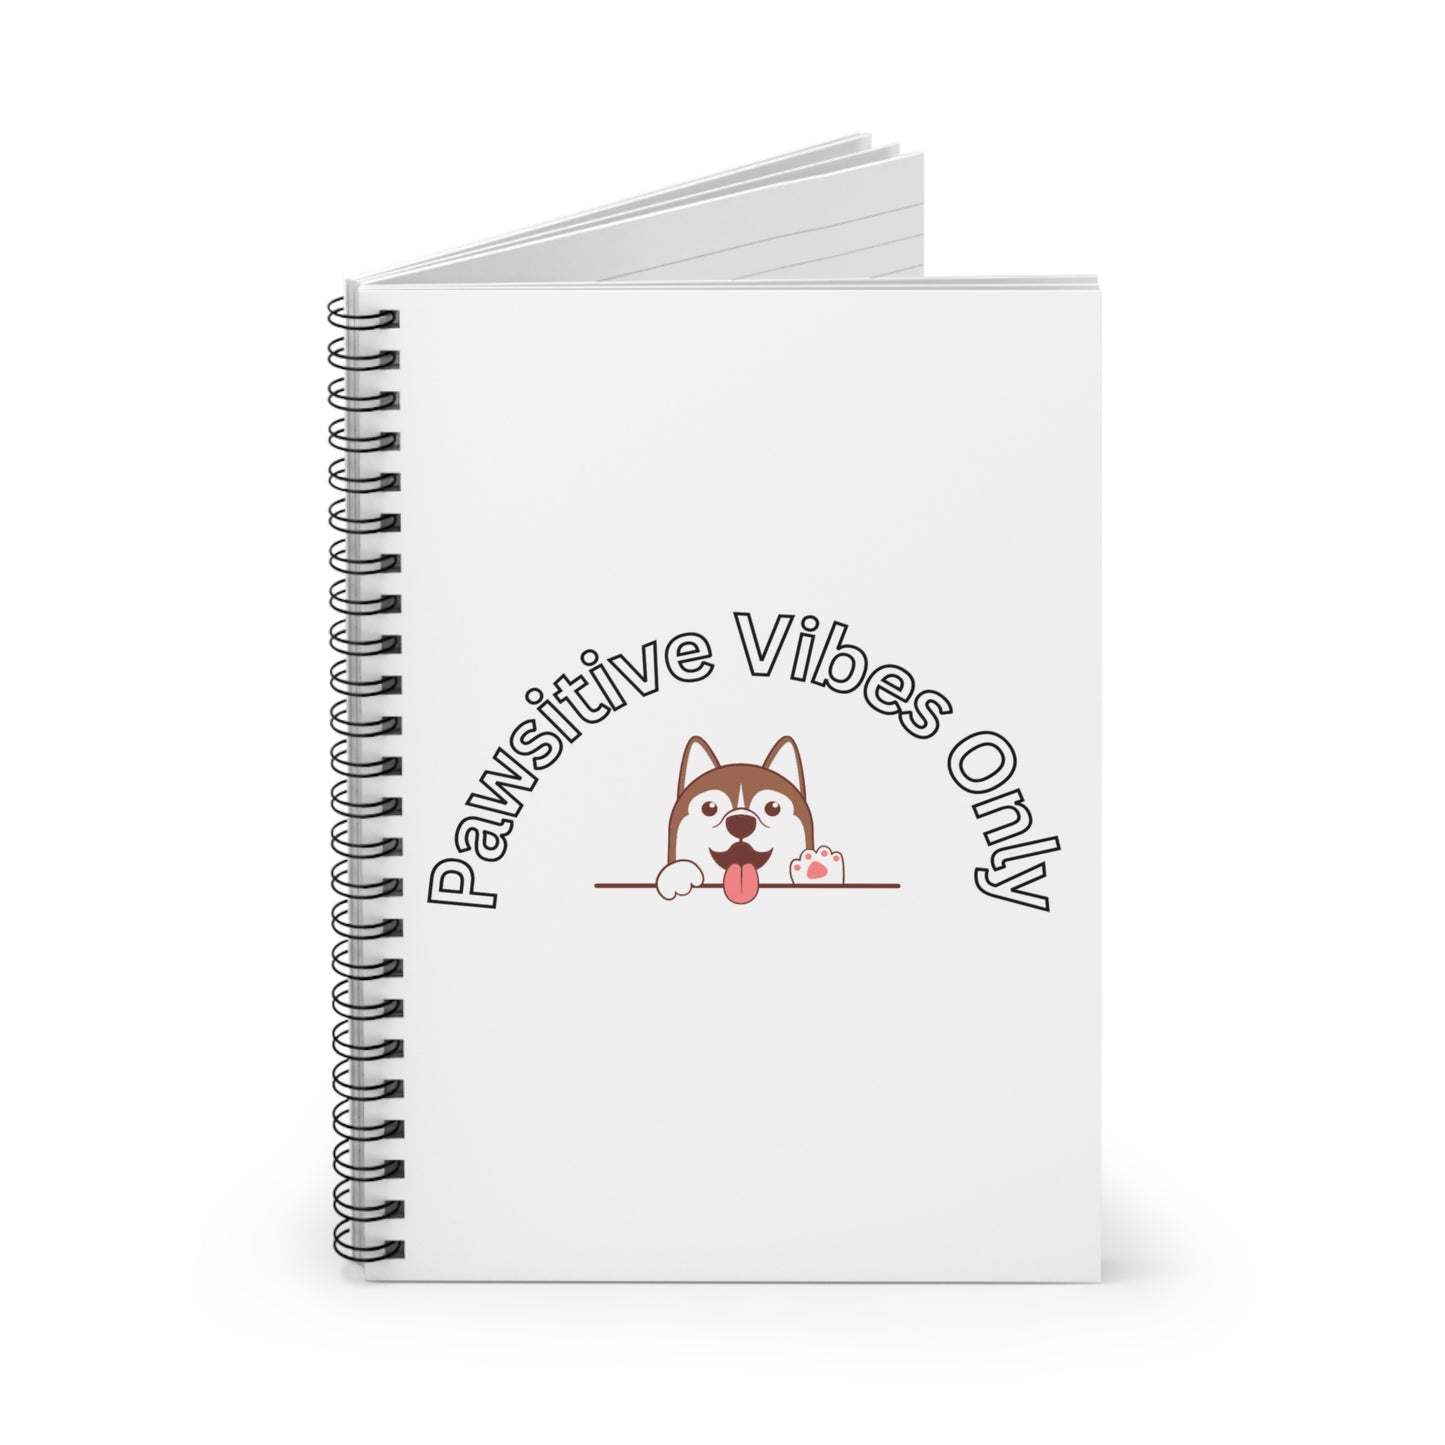 Pawsitive Vibes Spiral Notebook - Ruled Line